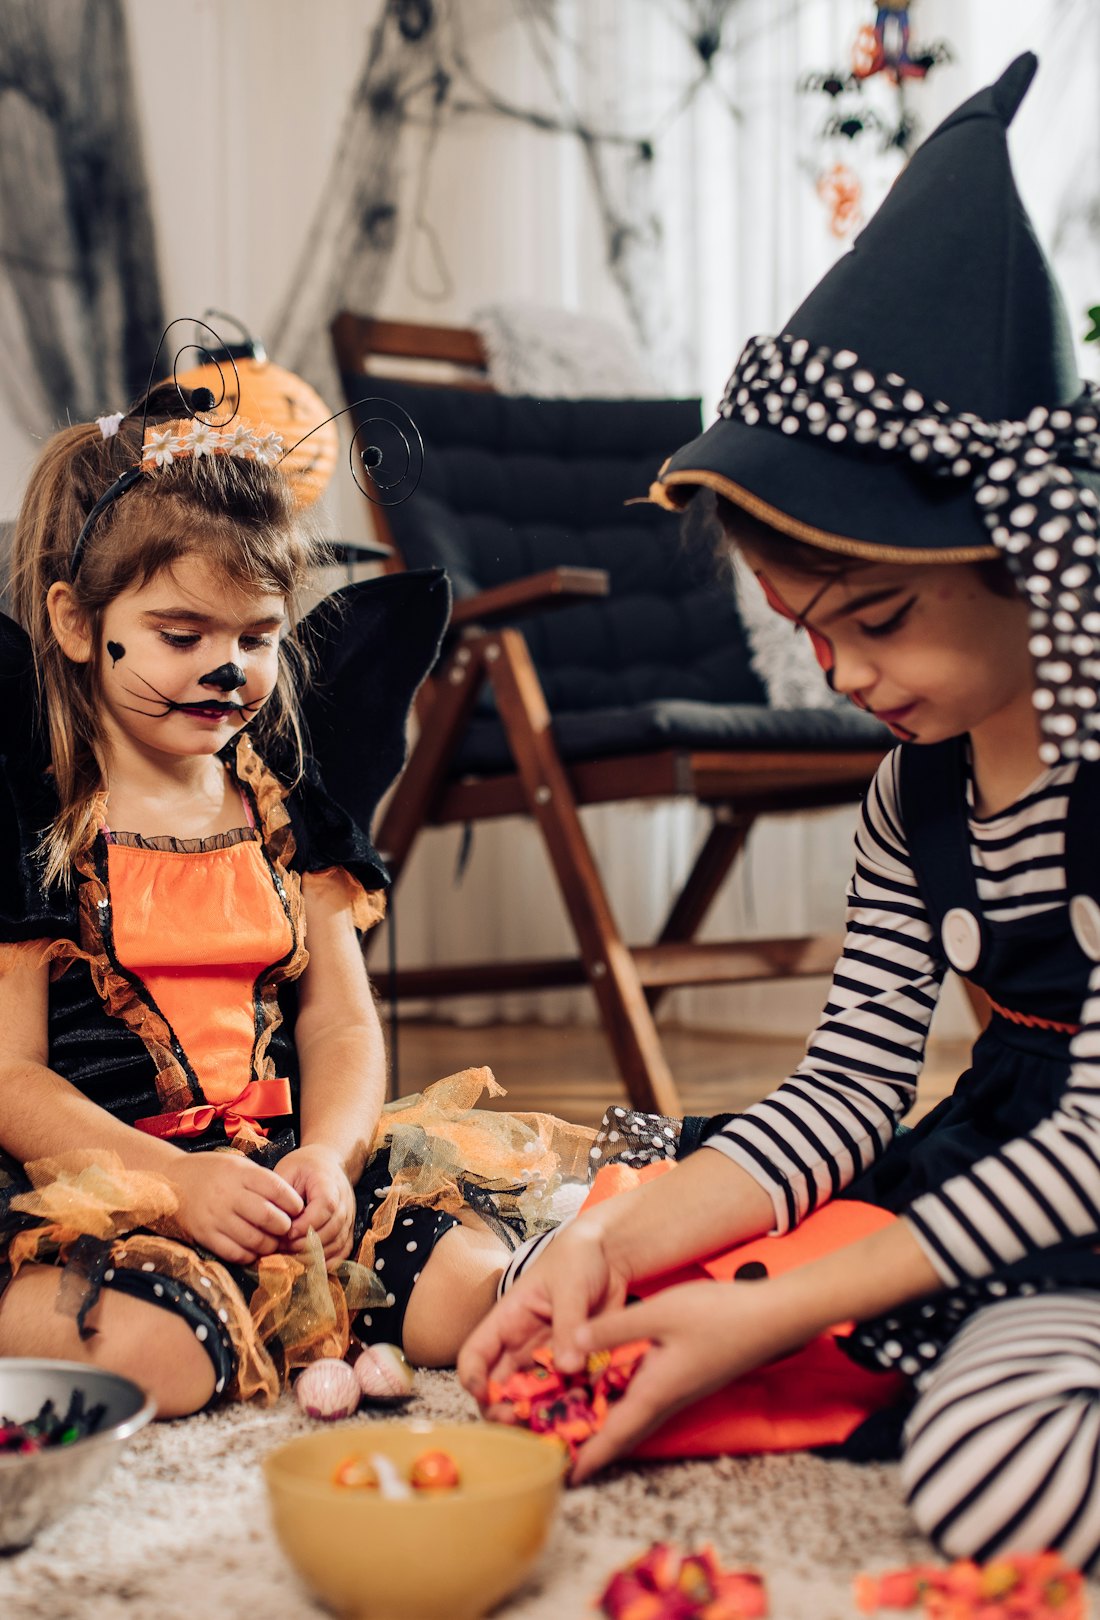 Two cute girls wearing Halloween costumes, playing and sharing candies at home.